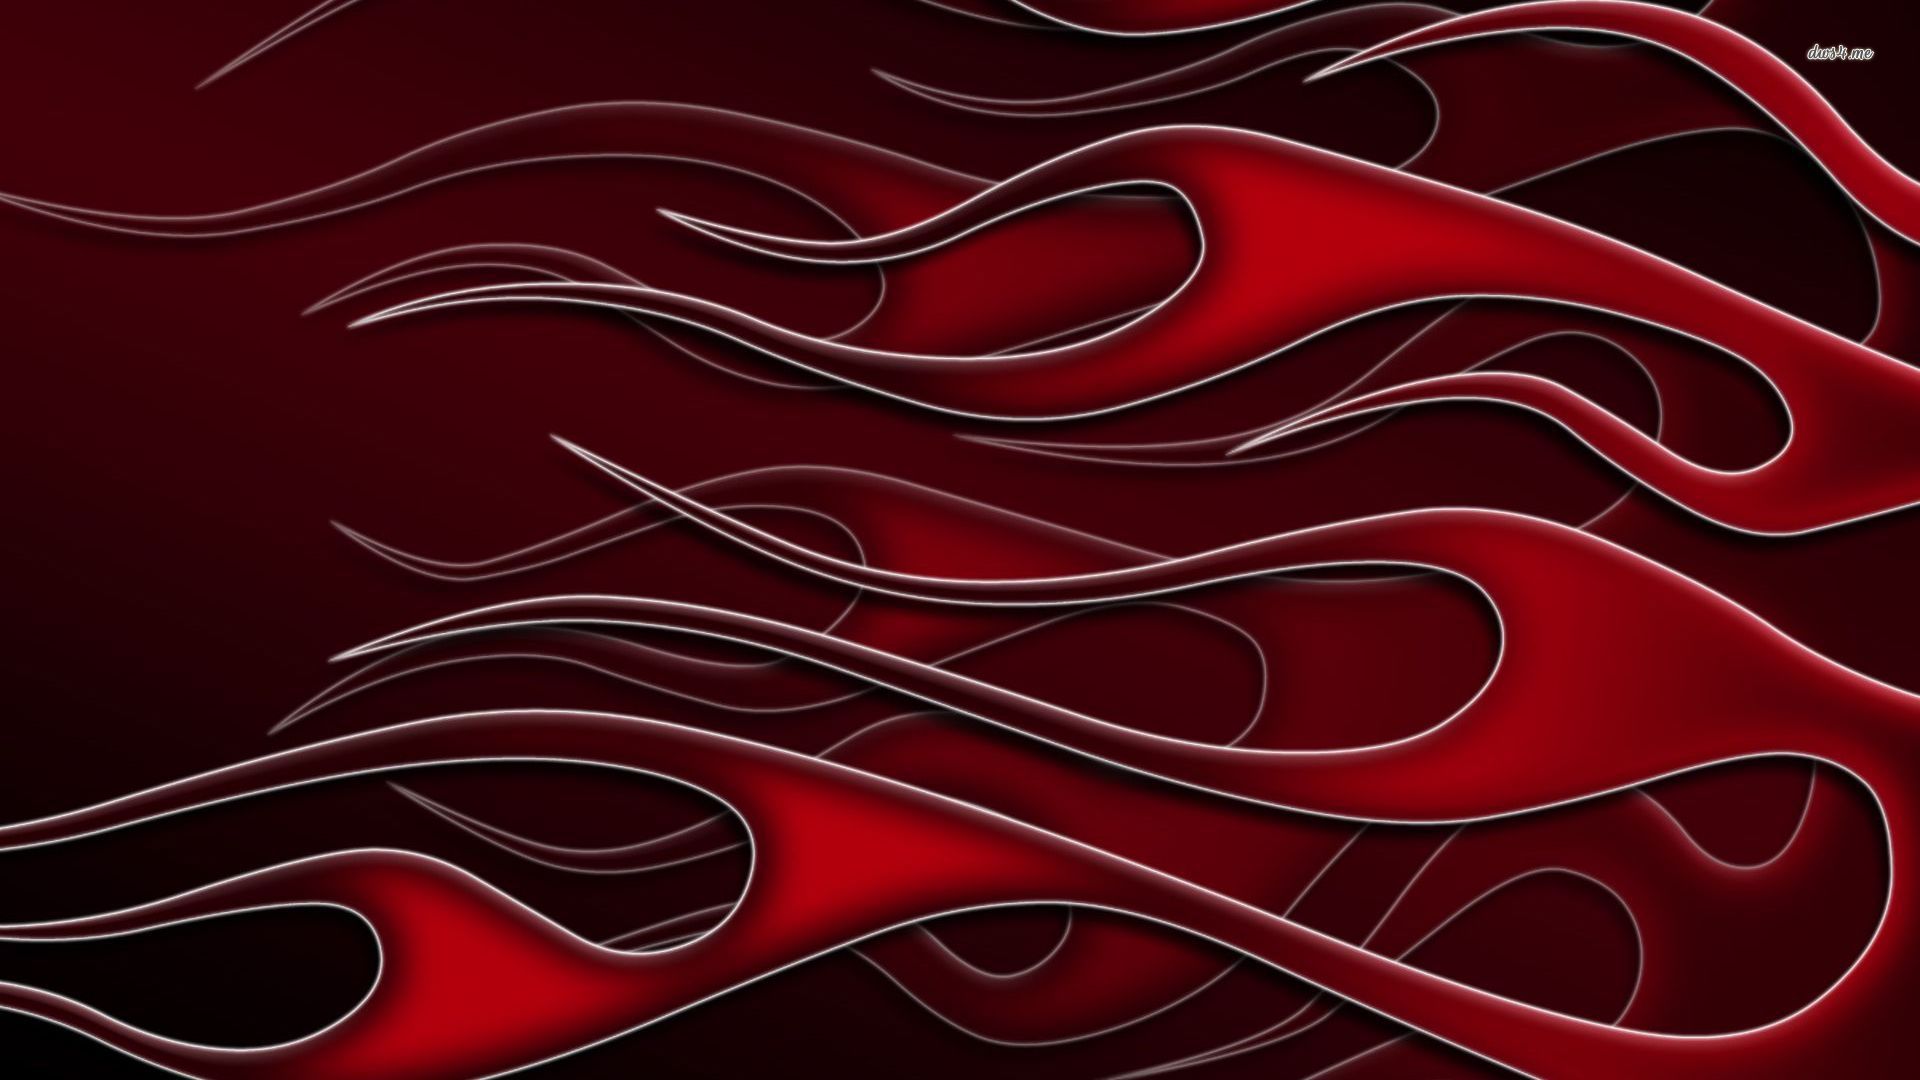 Flames Wallpaper 30737 Hd Wallpapers Background